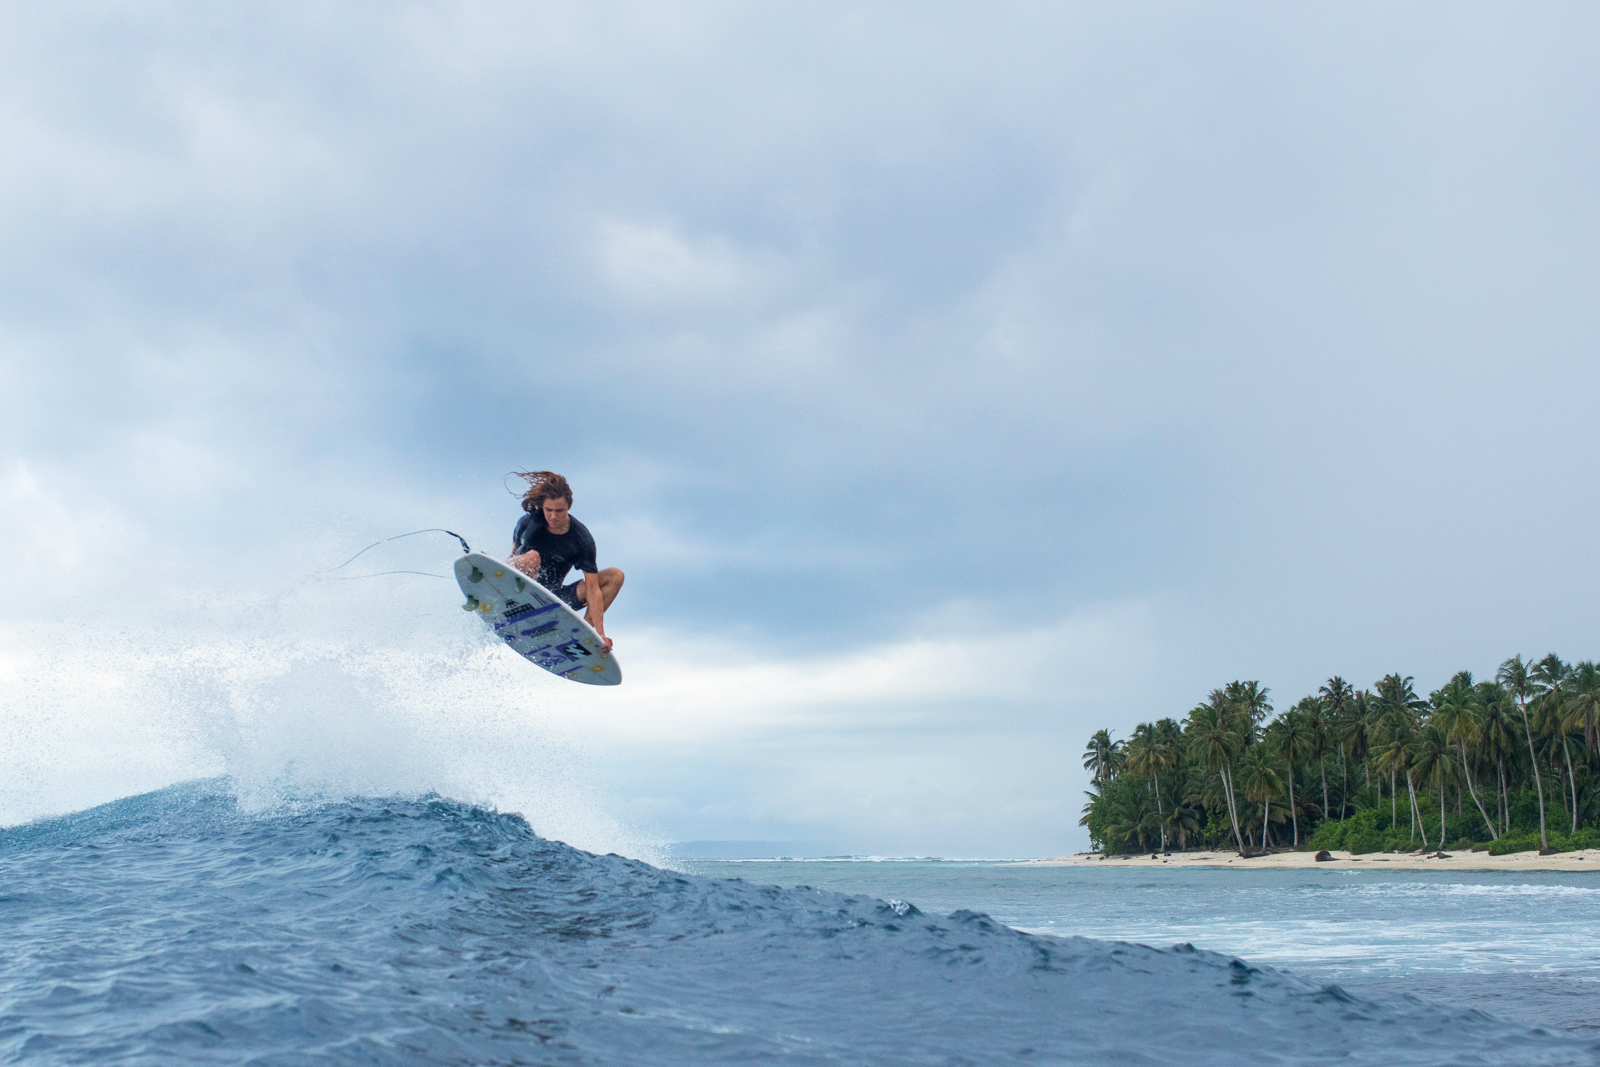 MORE BOARDSHORTS: A Chat With Billabong's Shaun Manners